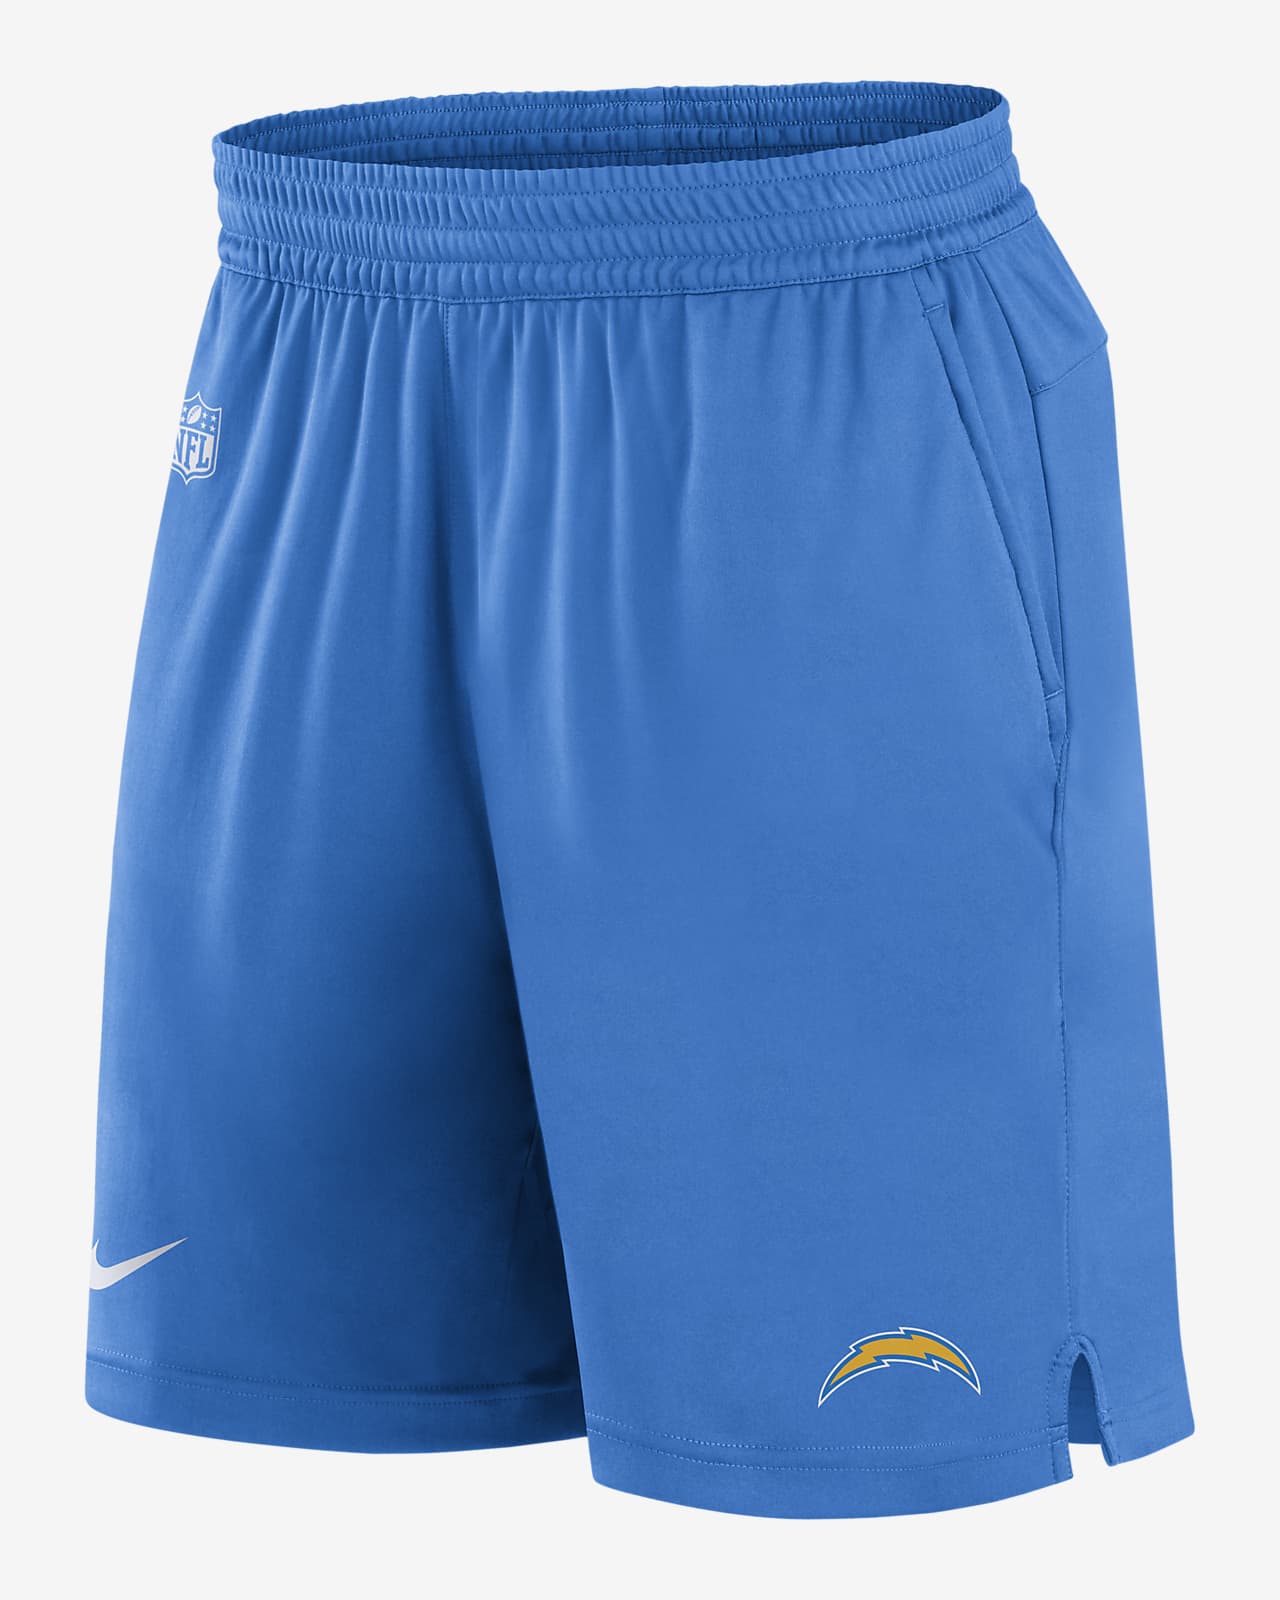 Nike Dri-FIT Sideline (NFL Los Angeles Chargers) Men's Shorts.